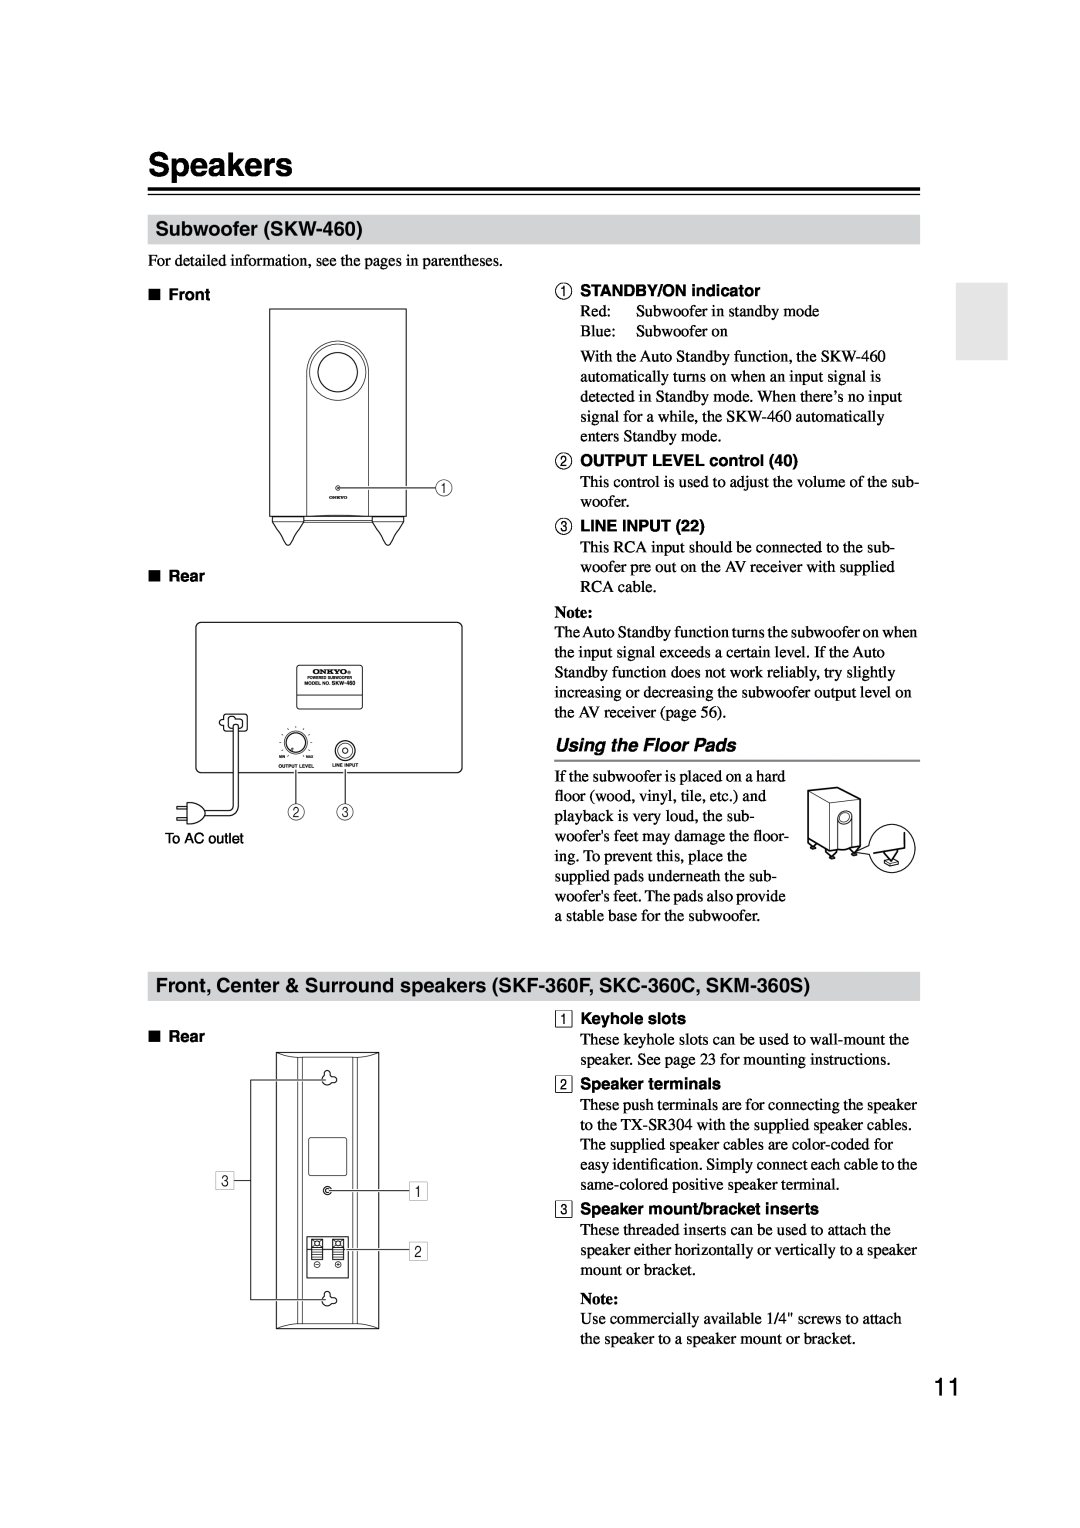 Onkyo HT-S4100 instruction manual Speakers, Subwoofer SKW-460, Using the Floor Pads 